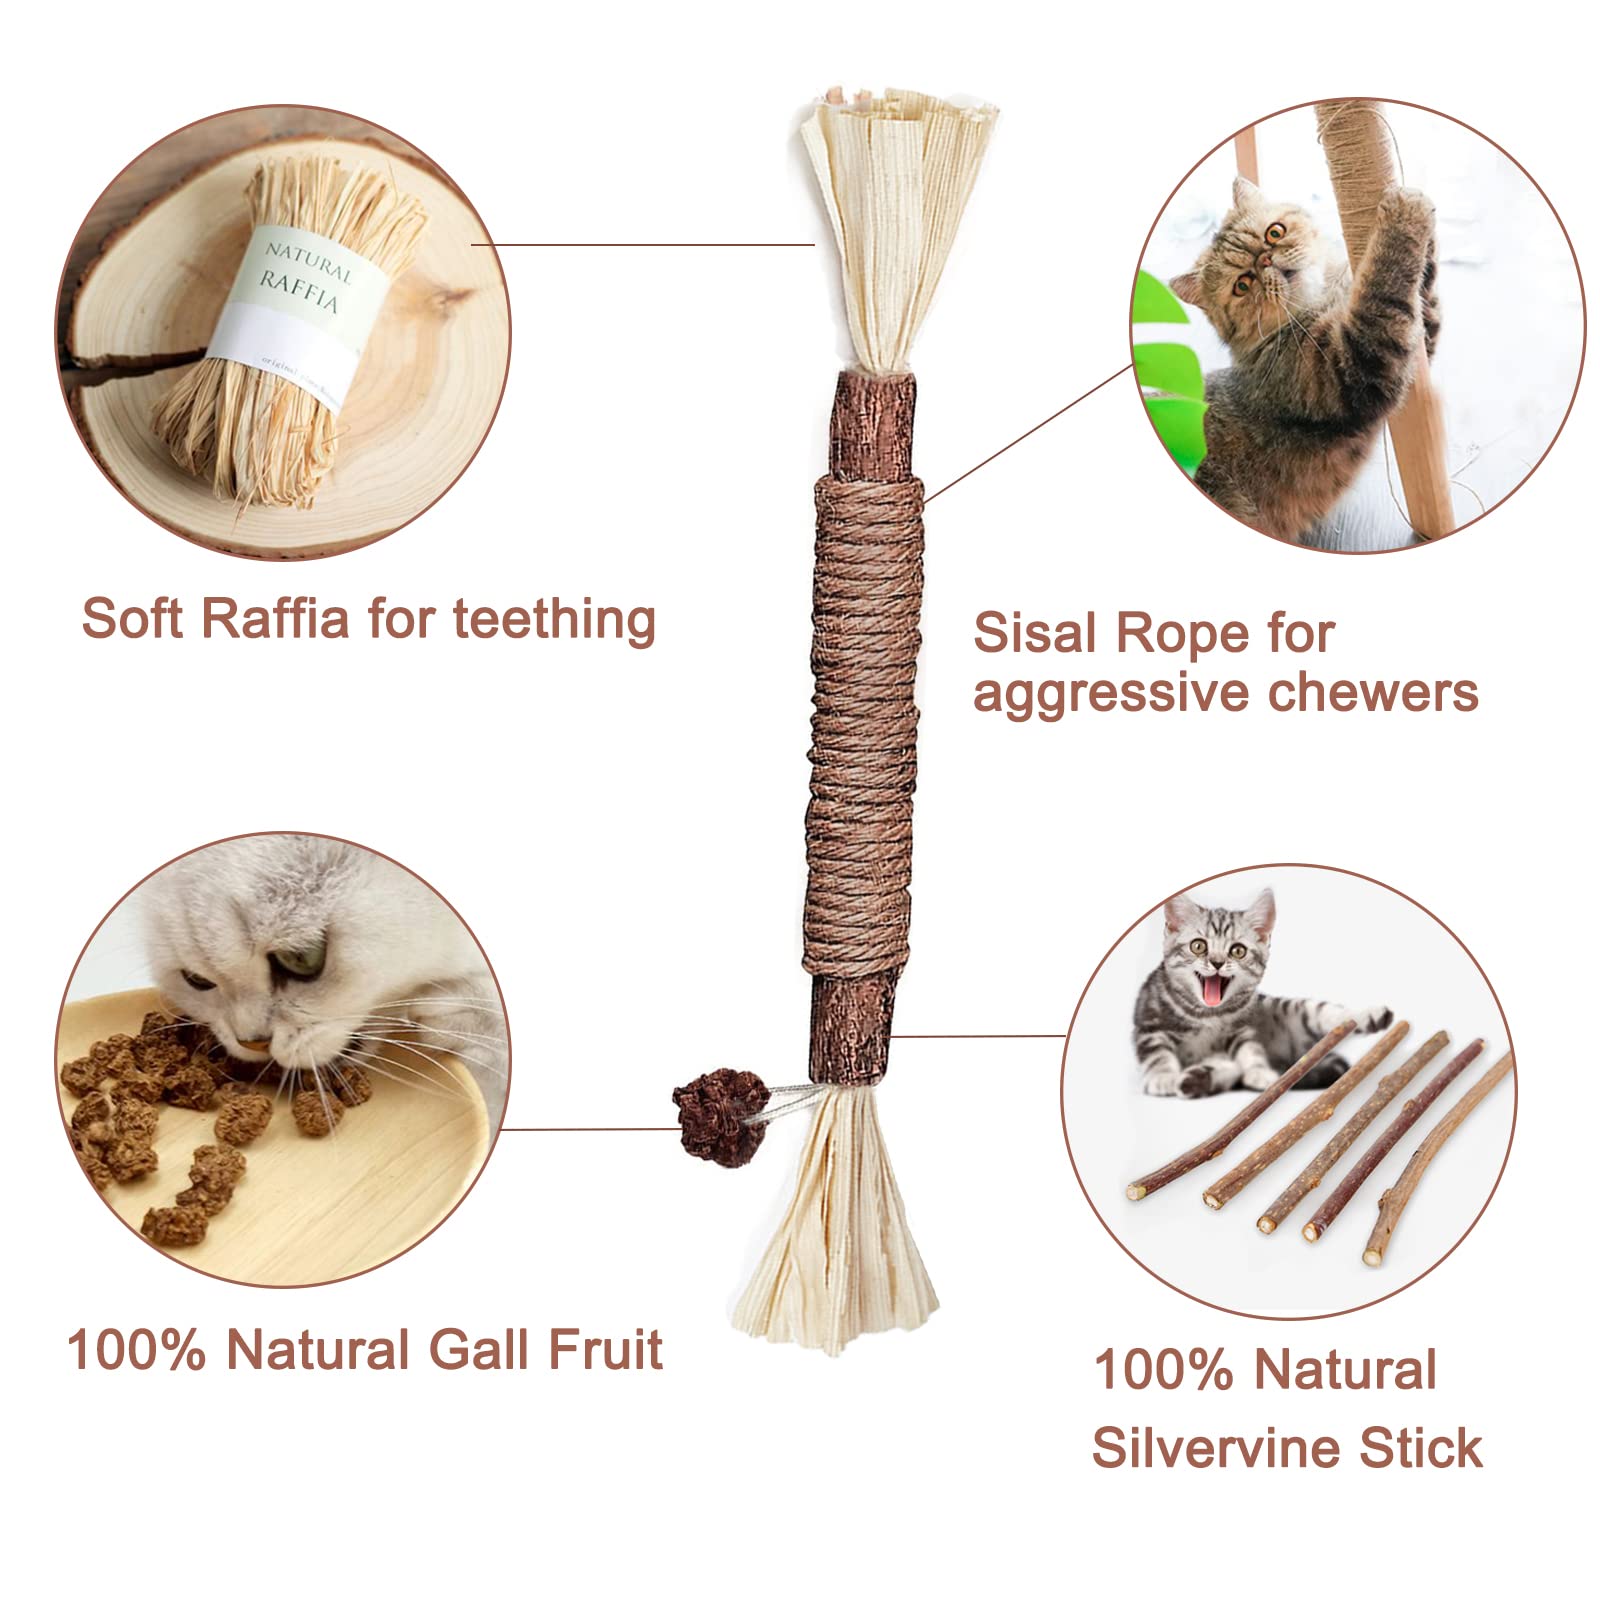 🎅EARLY CHRISTMAS SALE - 60% OFF🎄-😺Silvervine Sticks for Cats-BUY 5 GET 5 FREE & FREE SHIPPING